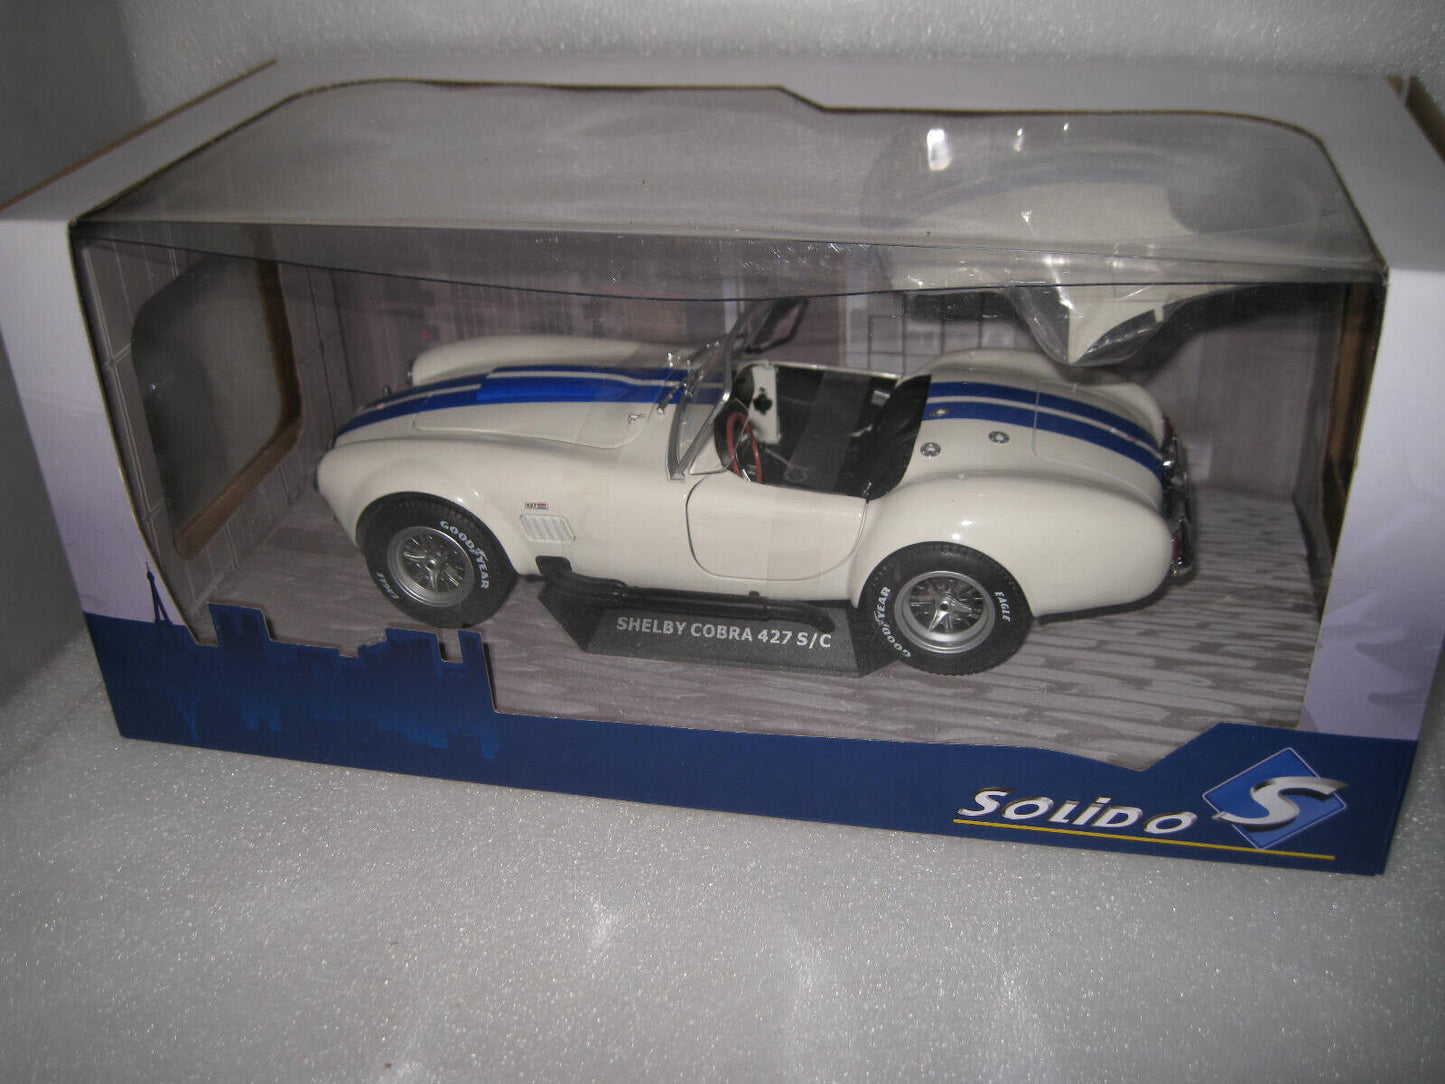 SOLIDO 1/18 1965 Shelby Cobra 427 S/C White Removable Hard Top #S1804906